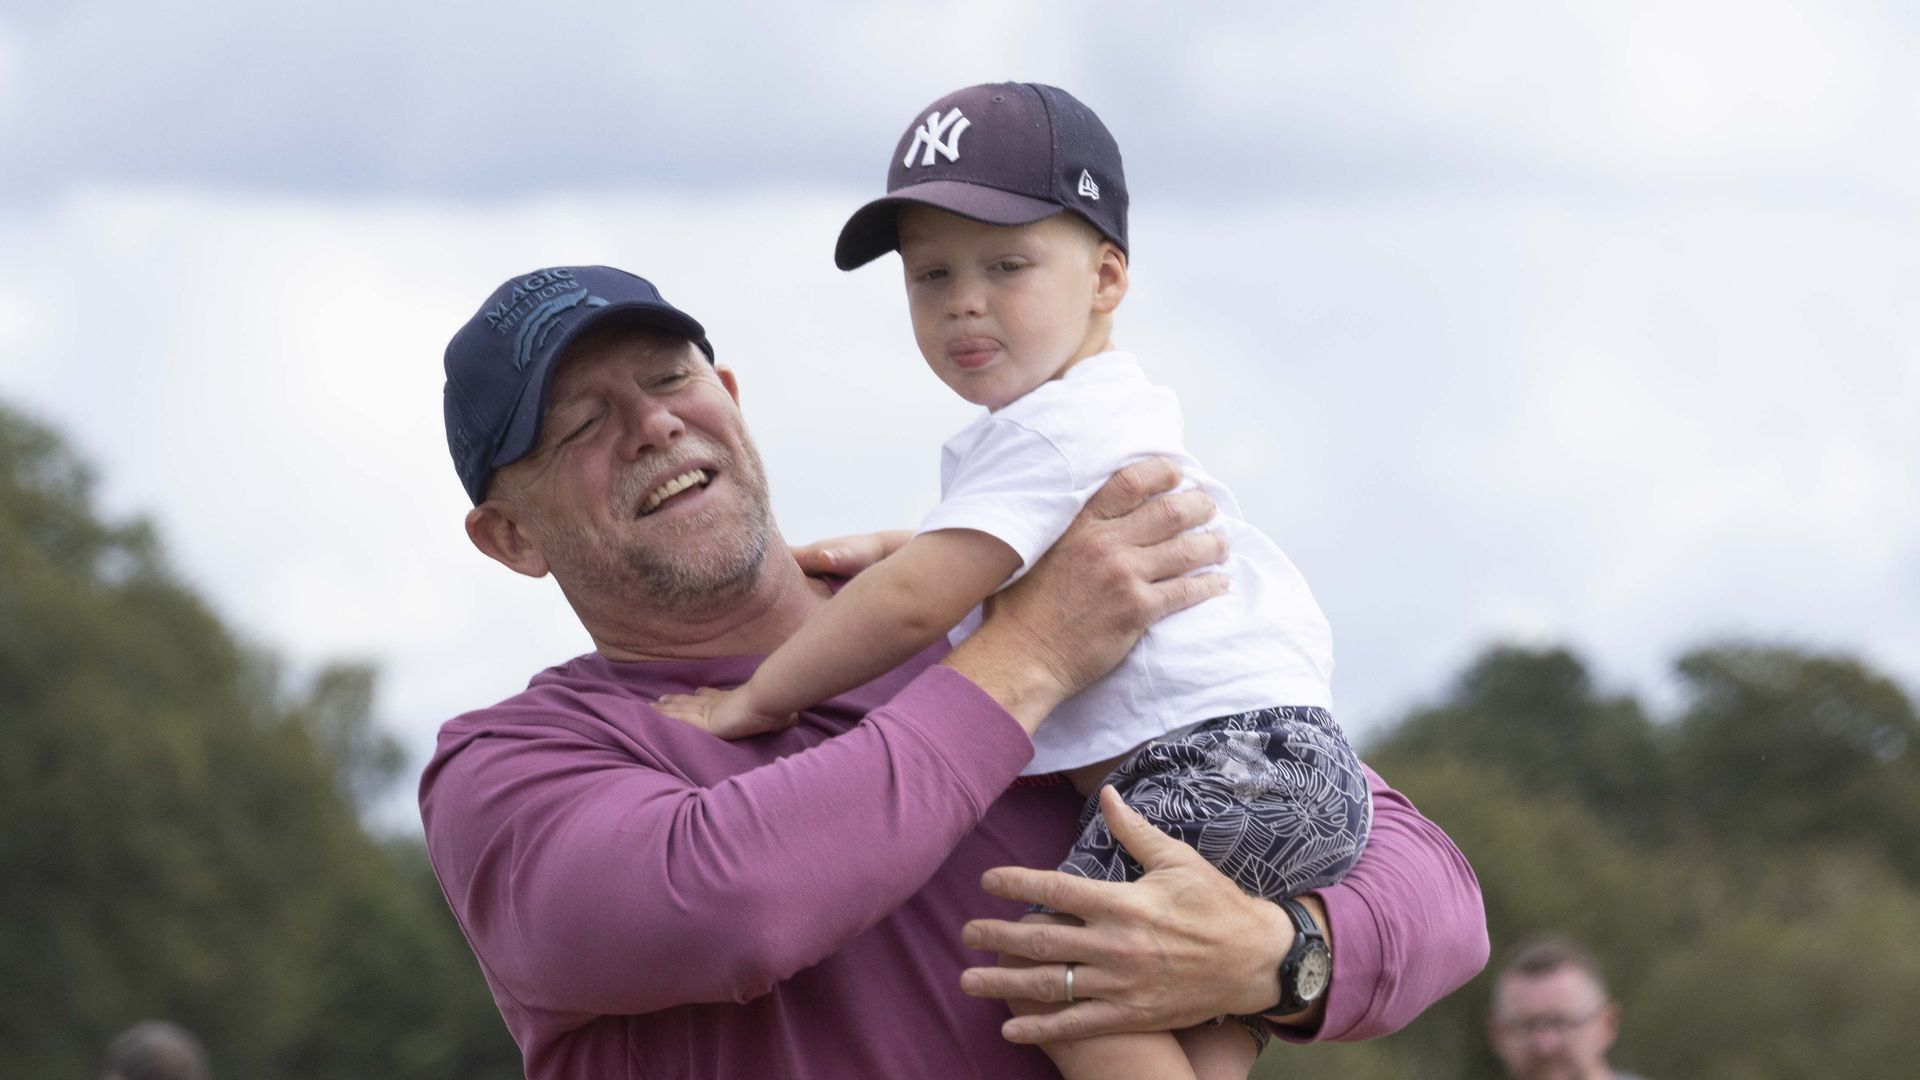 Mike Tindall carries son Lucas at Wellington International Horse Trials